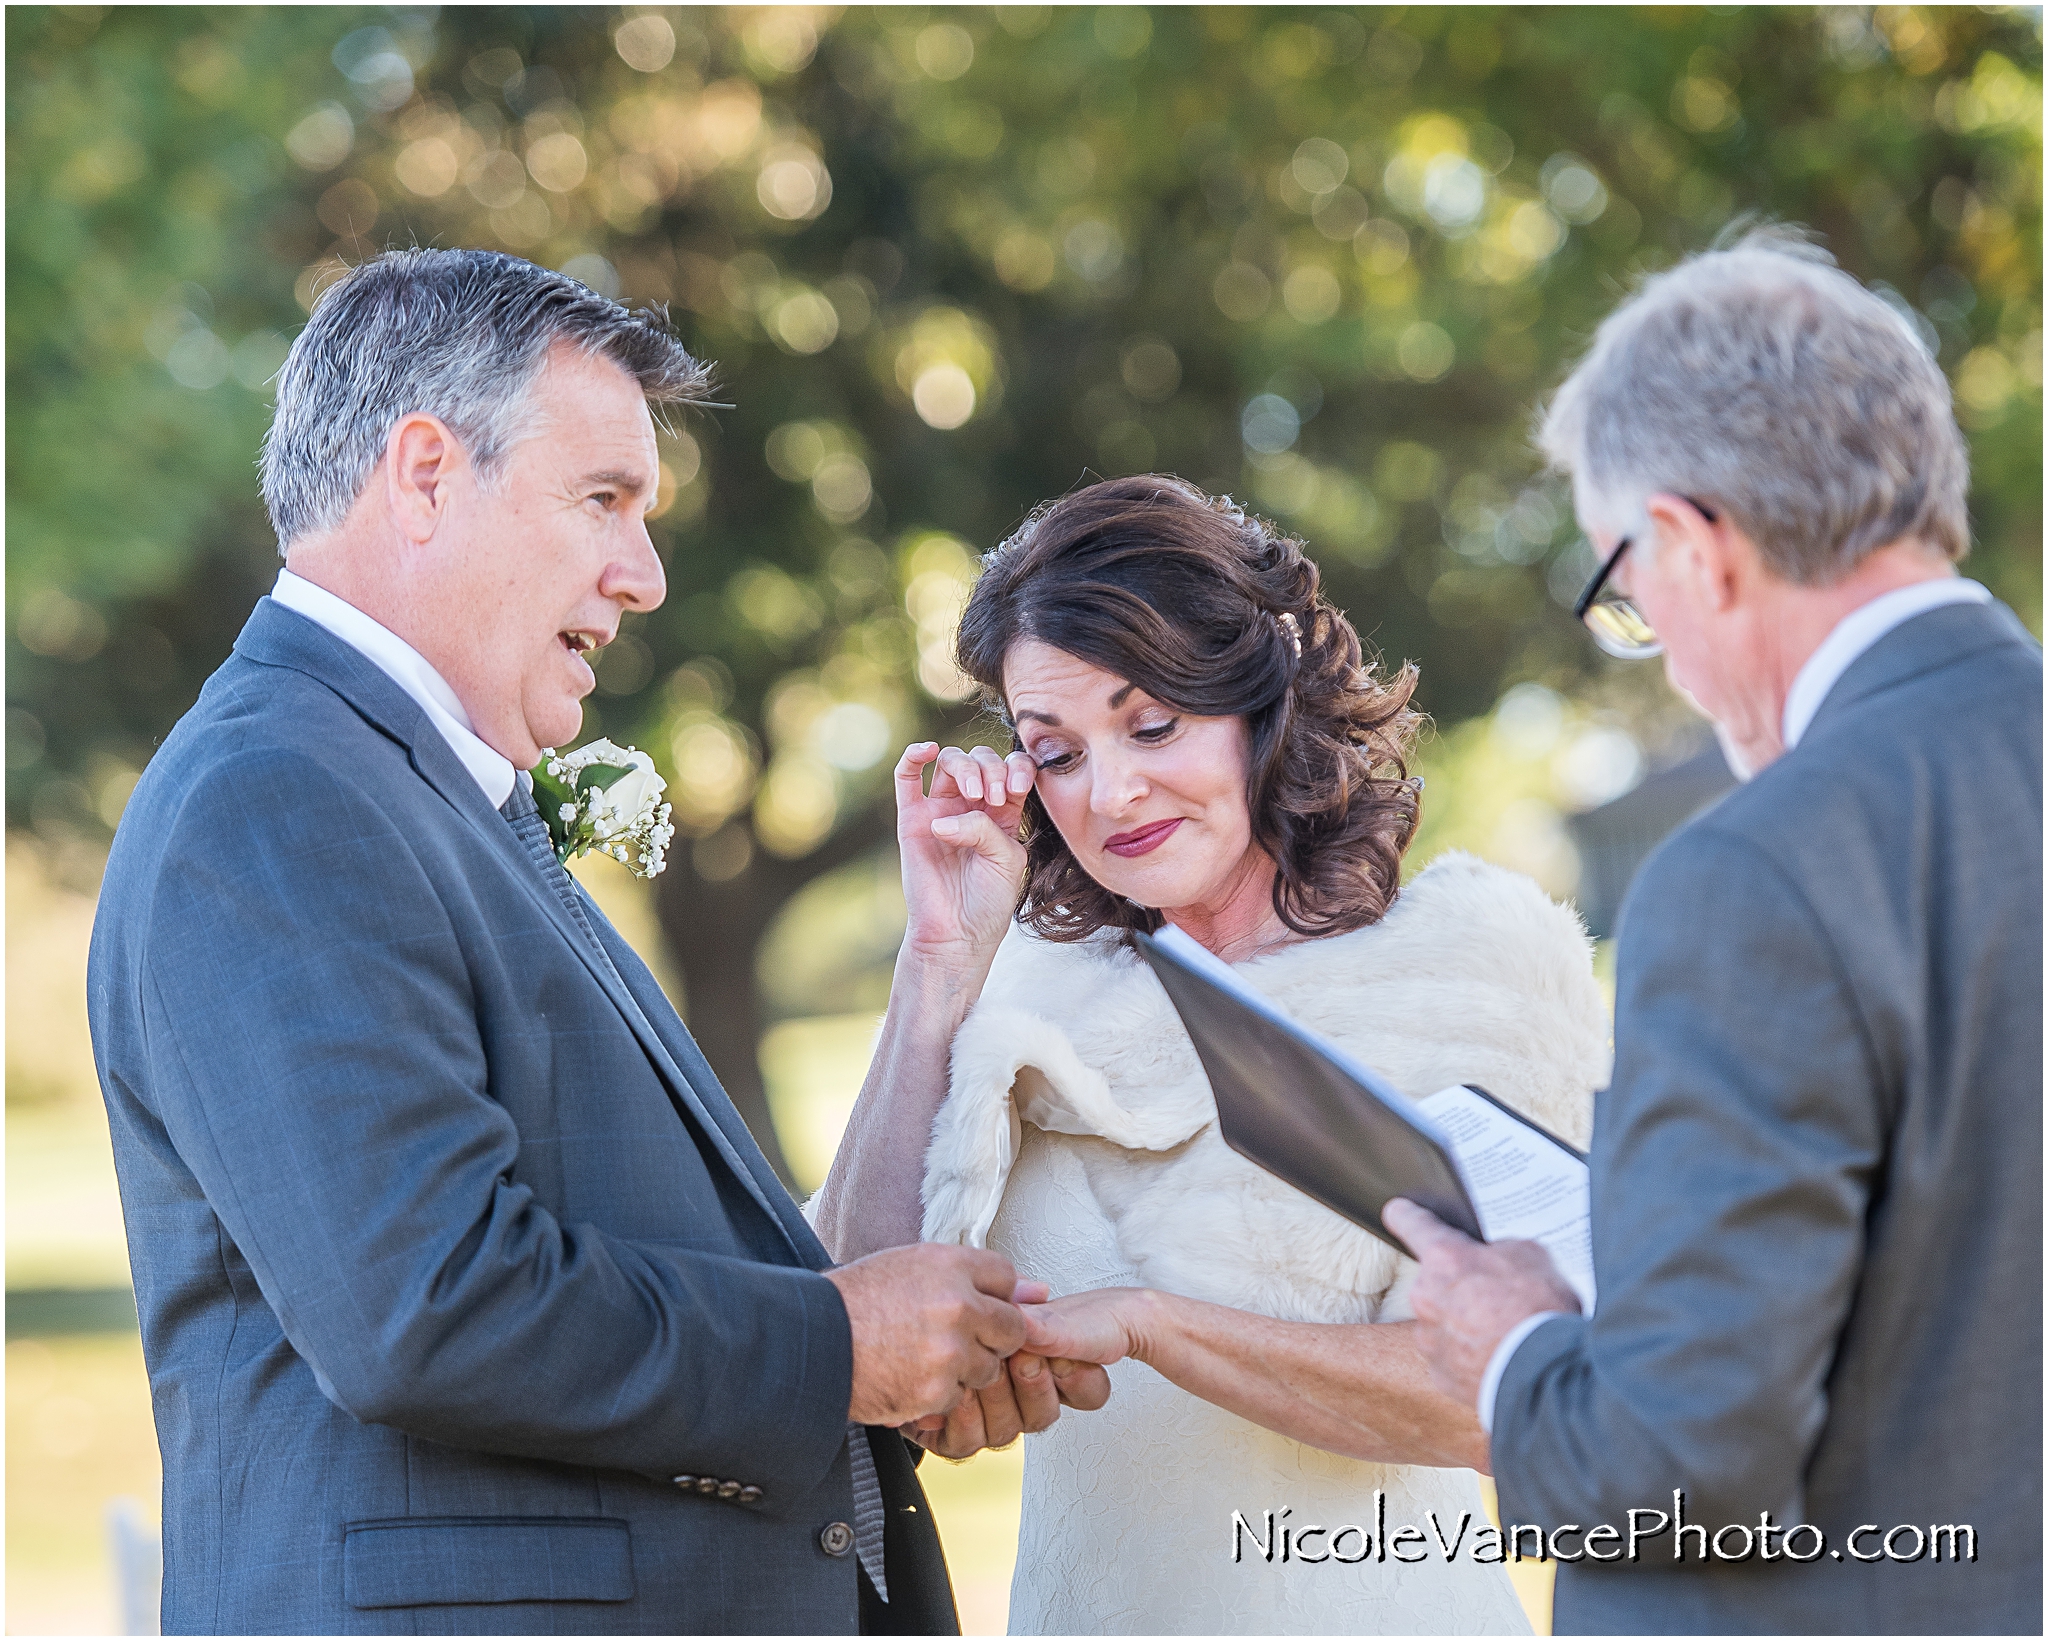 The couple exchange rings during their ceremony at Maymont Park.